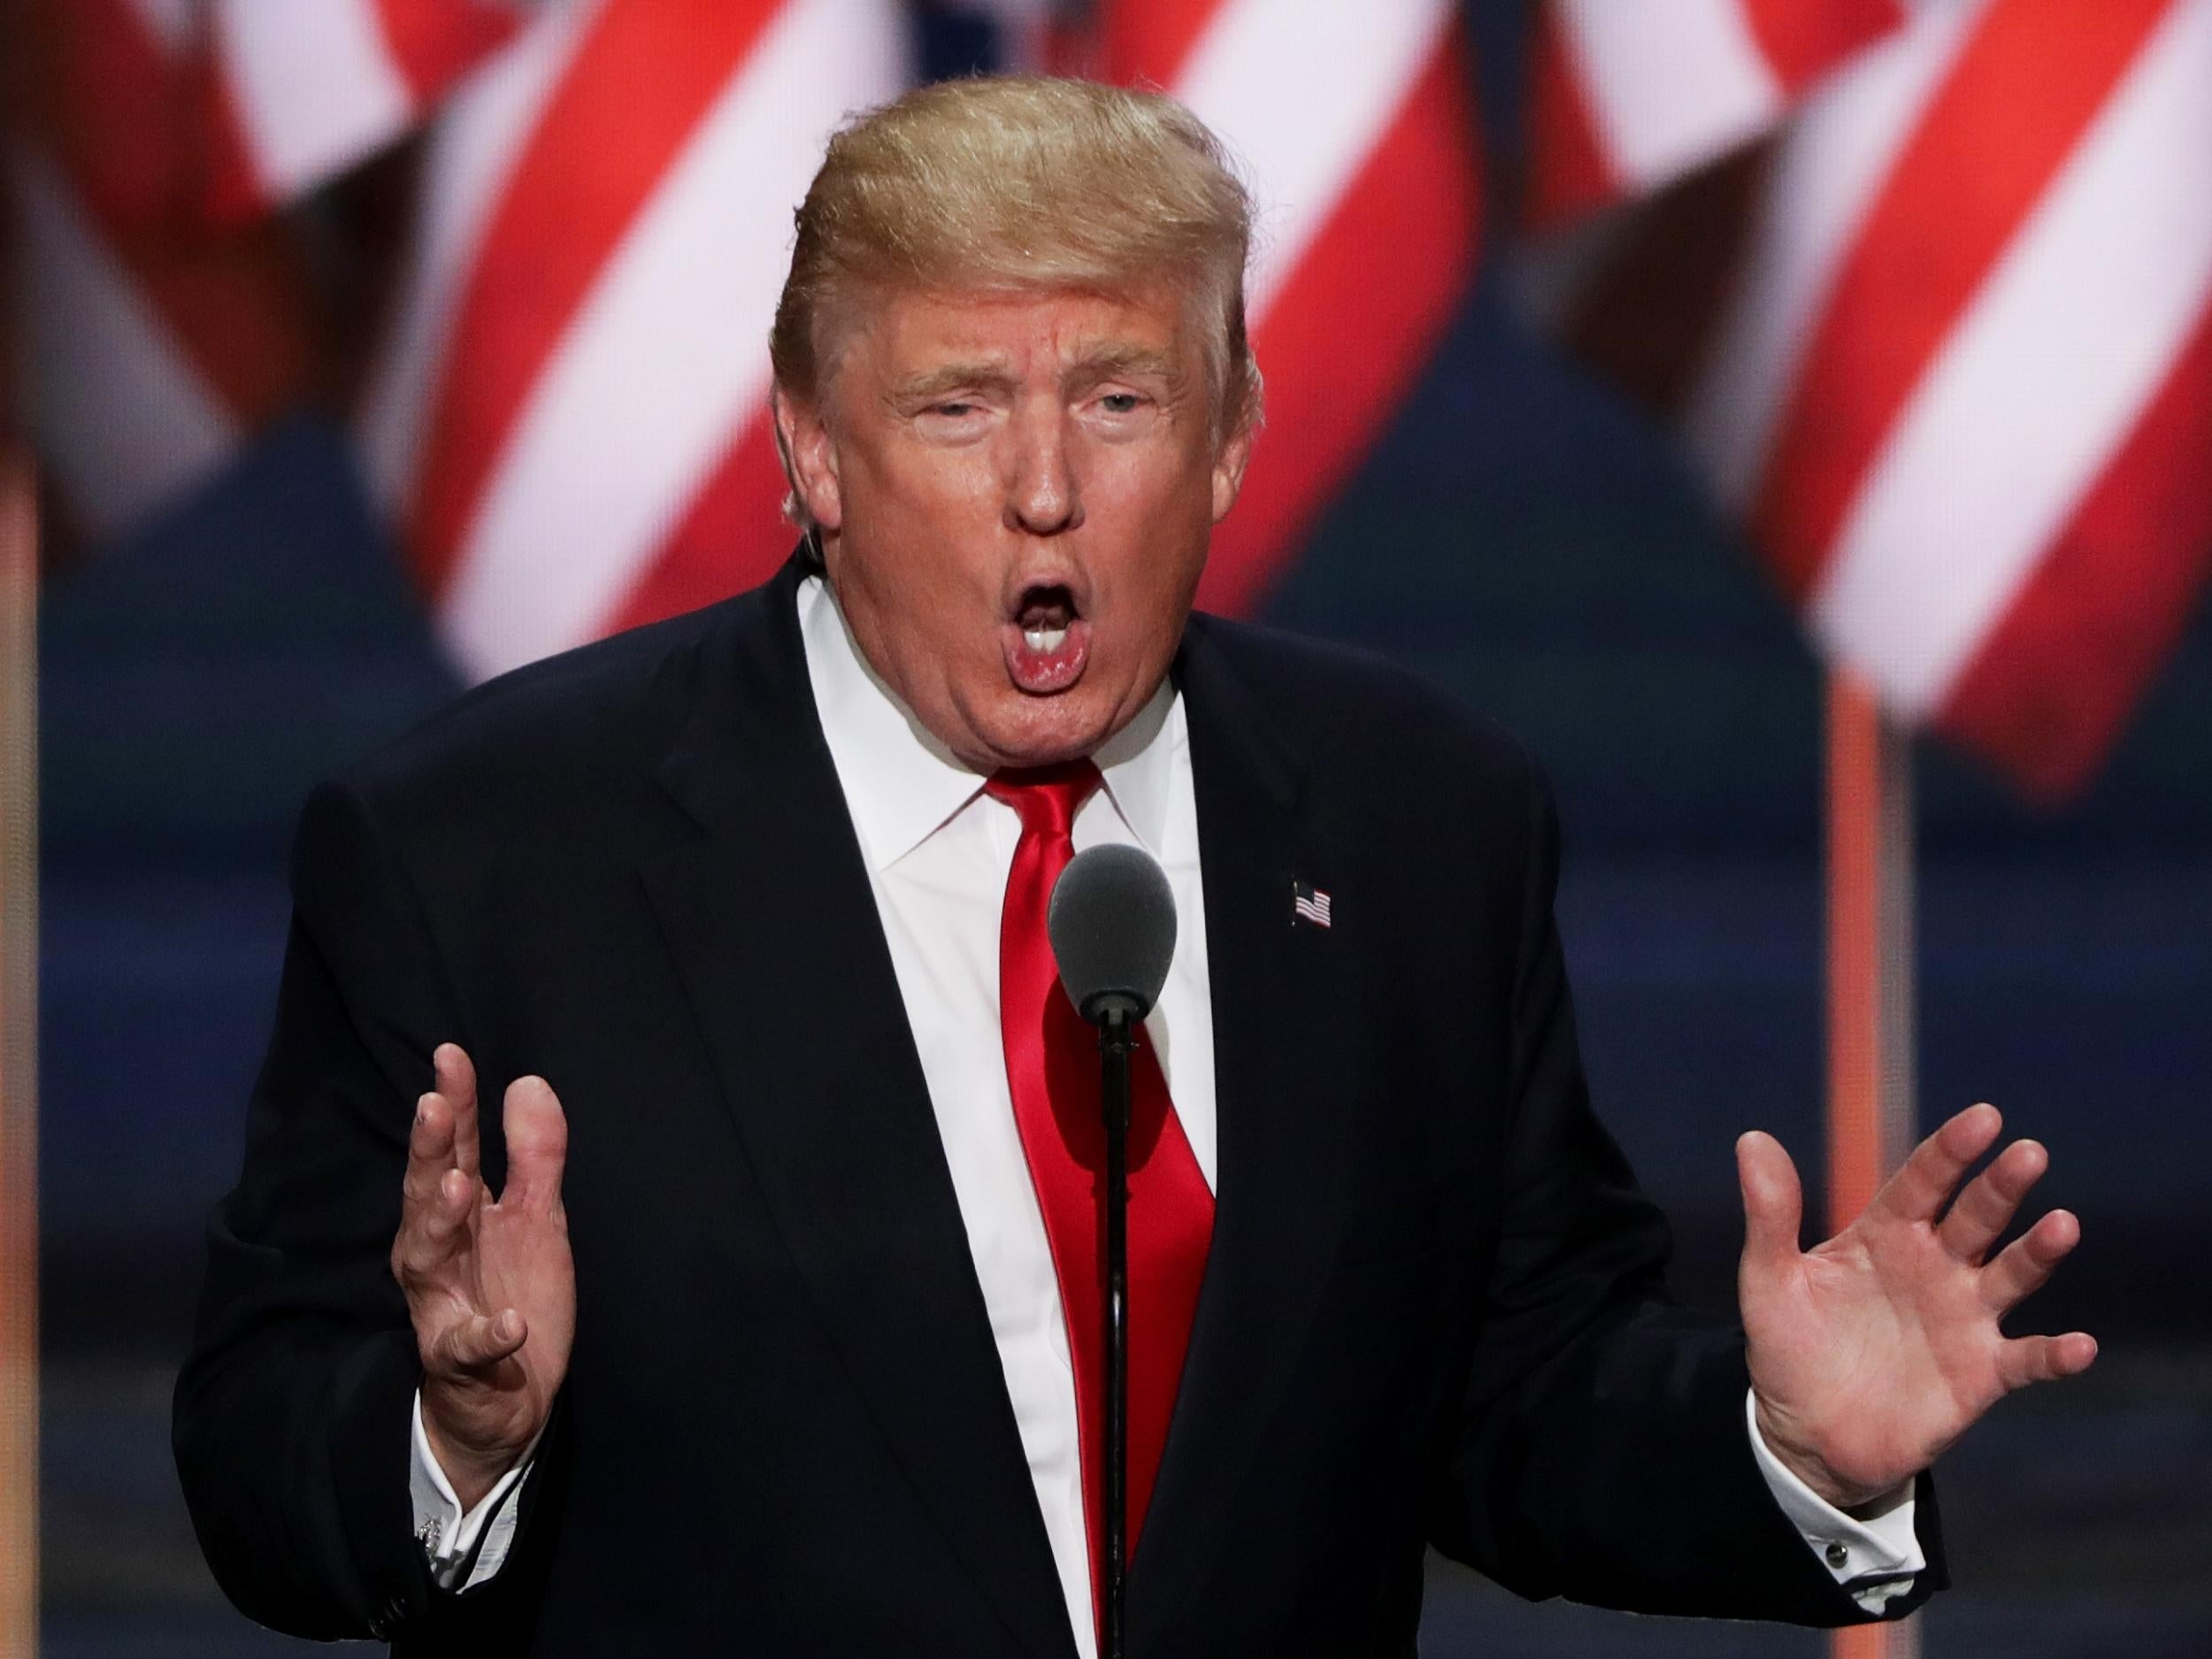 Republican presidential candidate Donald Trump delivers a speech during the evening session on the fourth day of the Republican National Convention